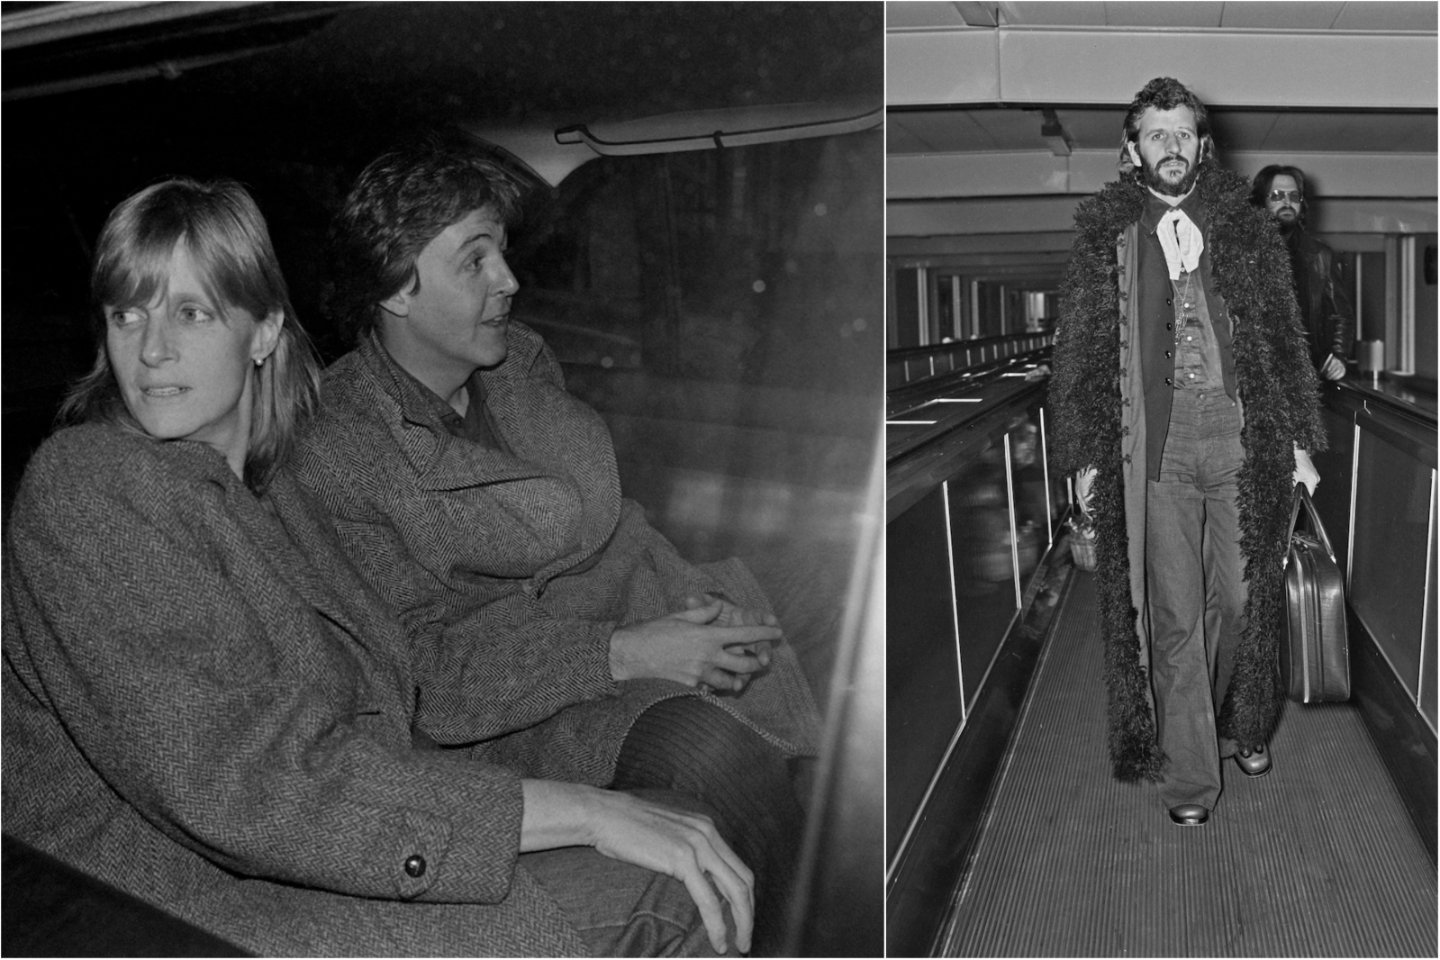 Linda and Paul McCartney in 1983; Ringo Starr at Heathrow Airport in 1973. Linda said she and Pal were afraid to talk to Ringo about his self-destructive behavior.